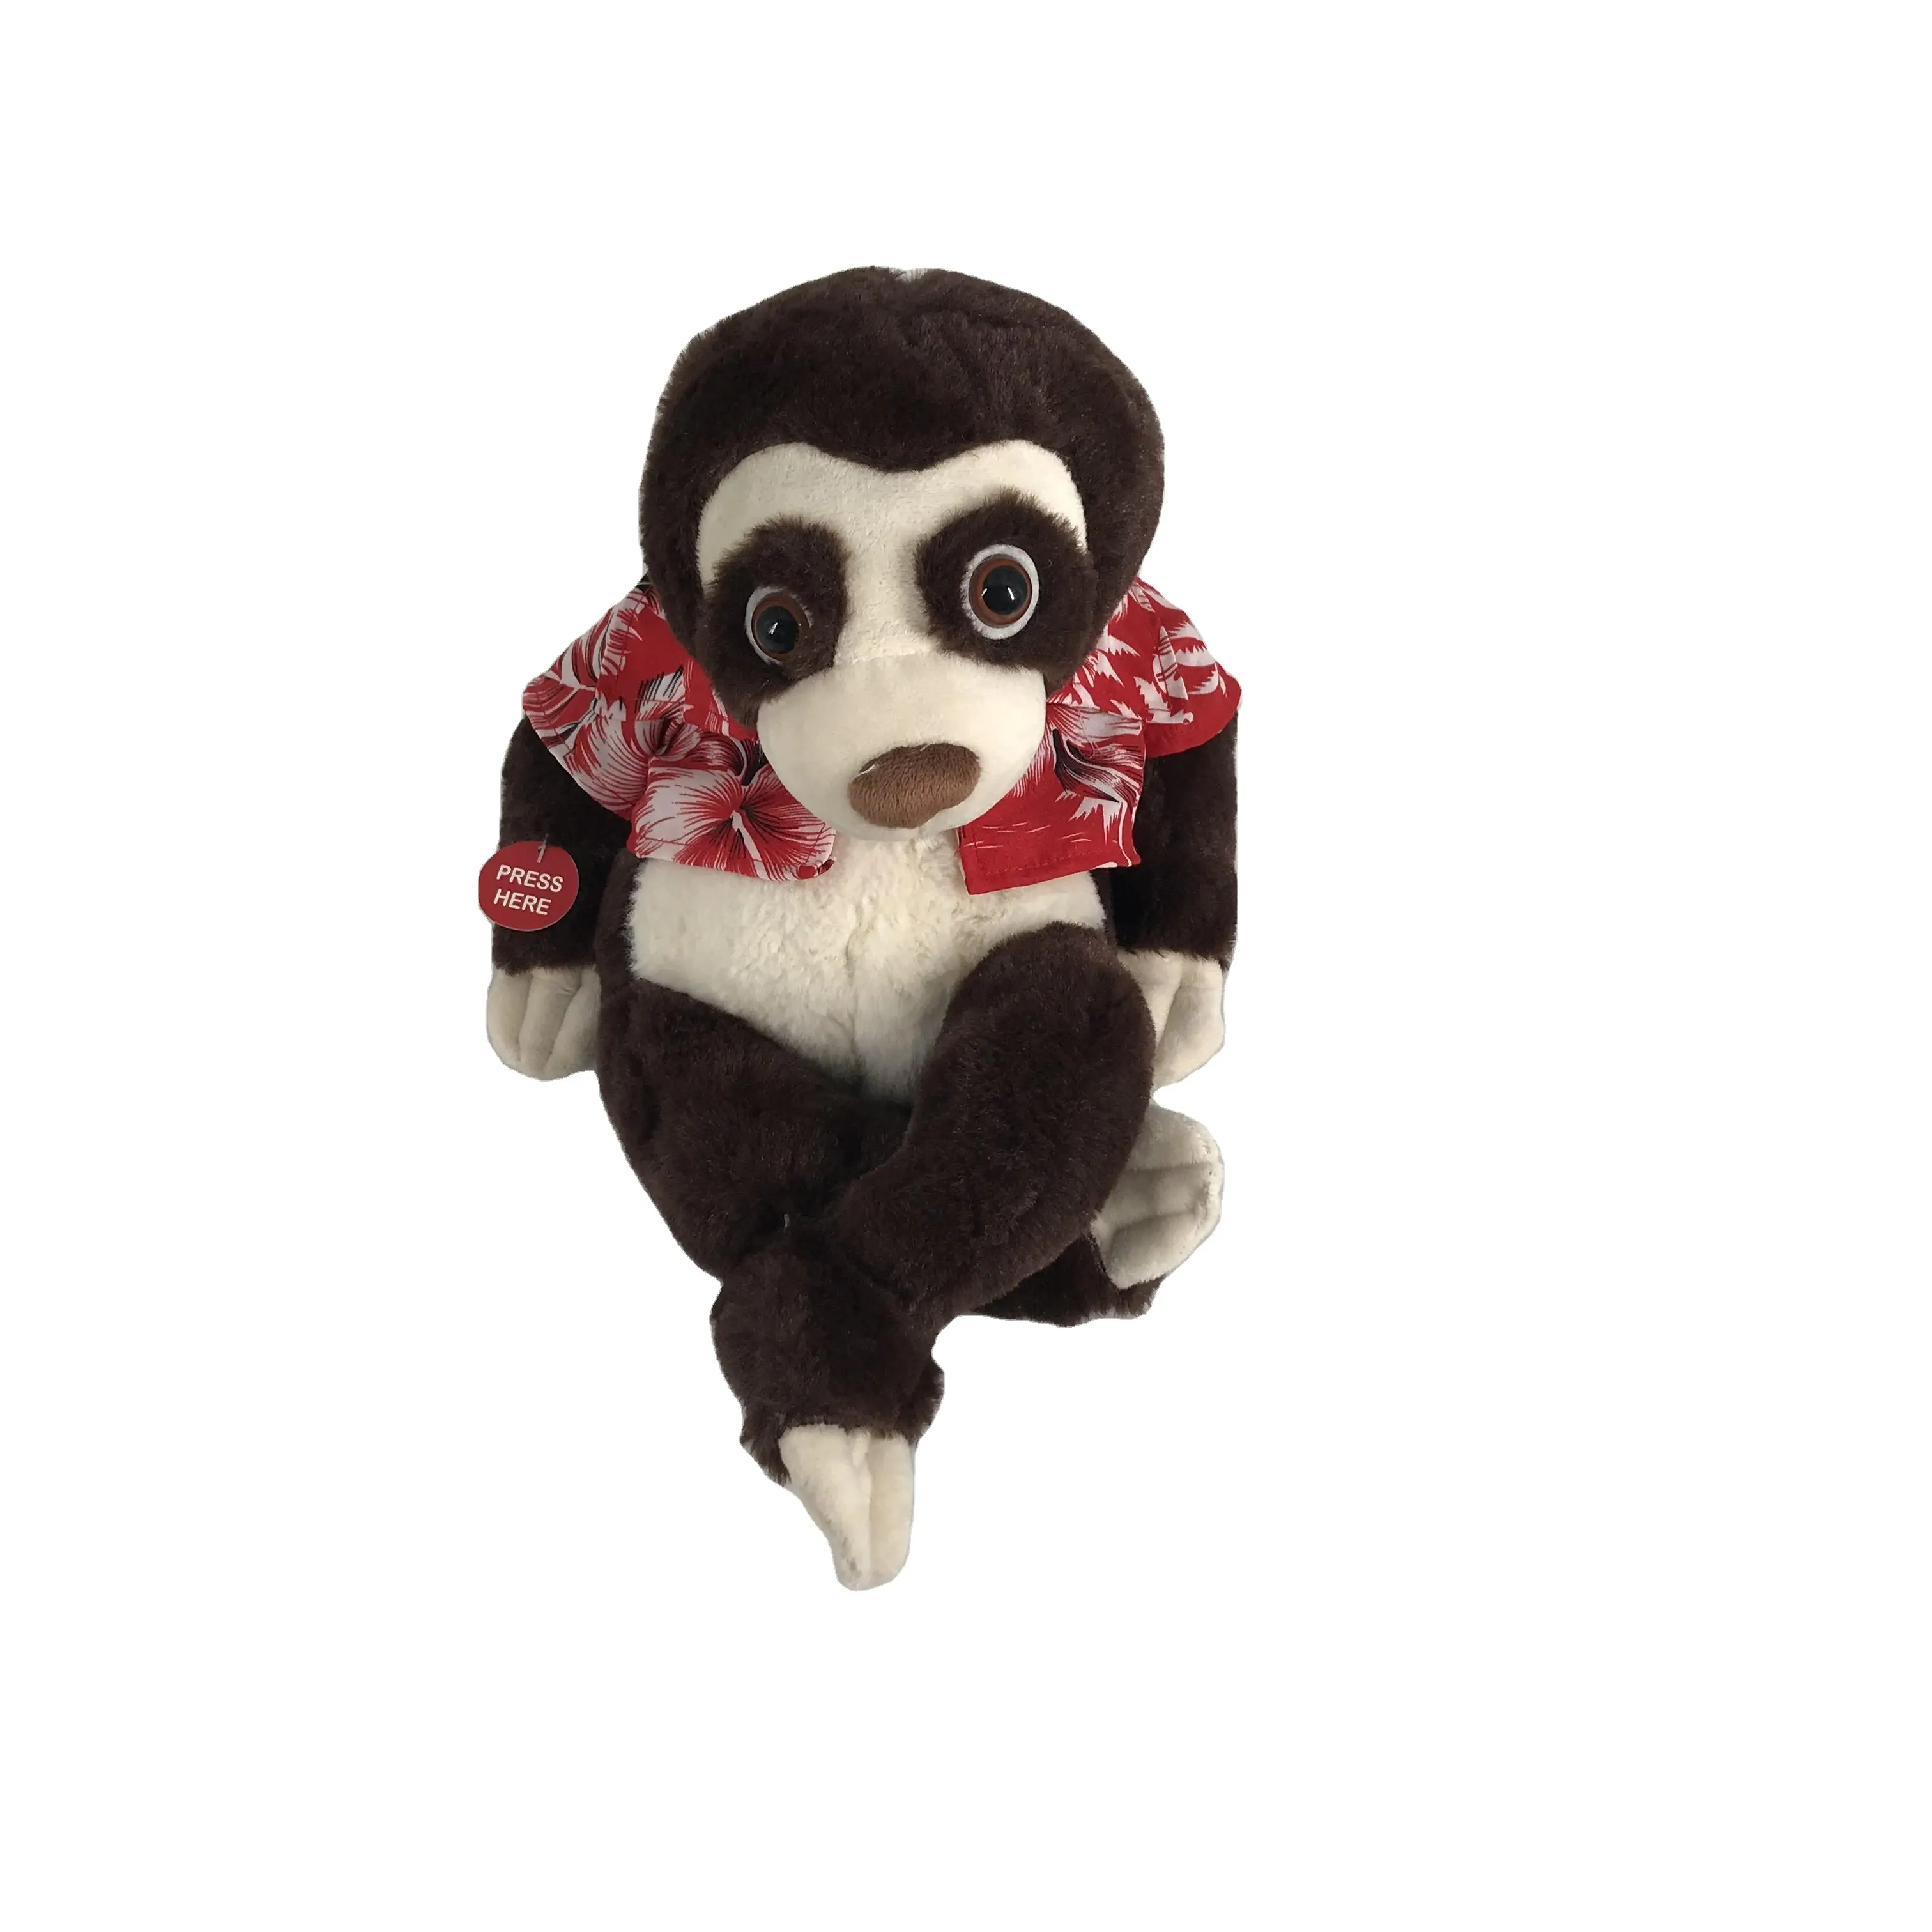 Children Birthday Gifts Cheap Monkey Kids Soft Cartoon Electric Toy Stuffed Animal Educational Plush Electronic Toys For Child